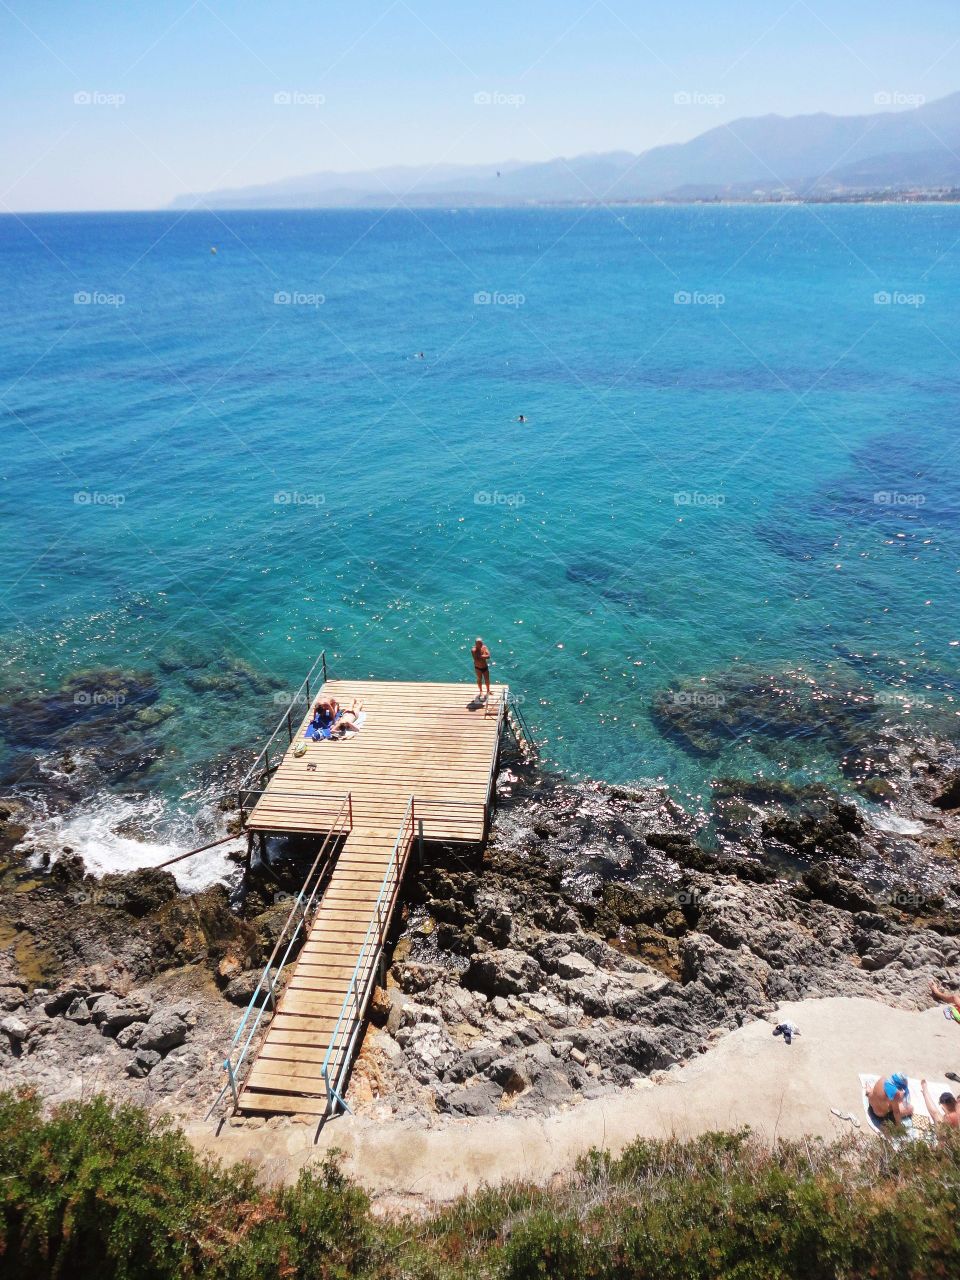 The Big Blue is waiting for you to discover it! (Crete)